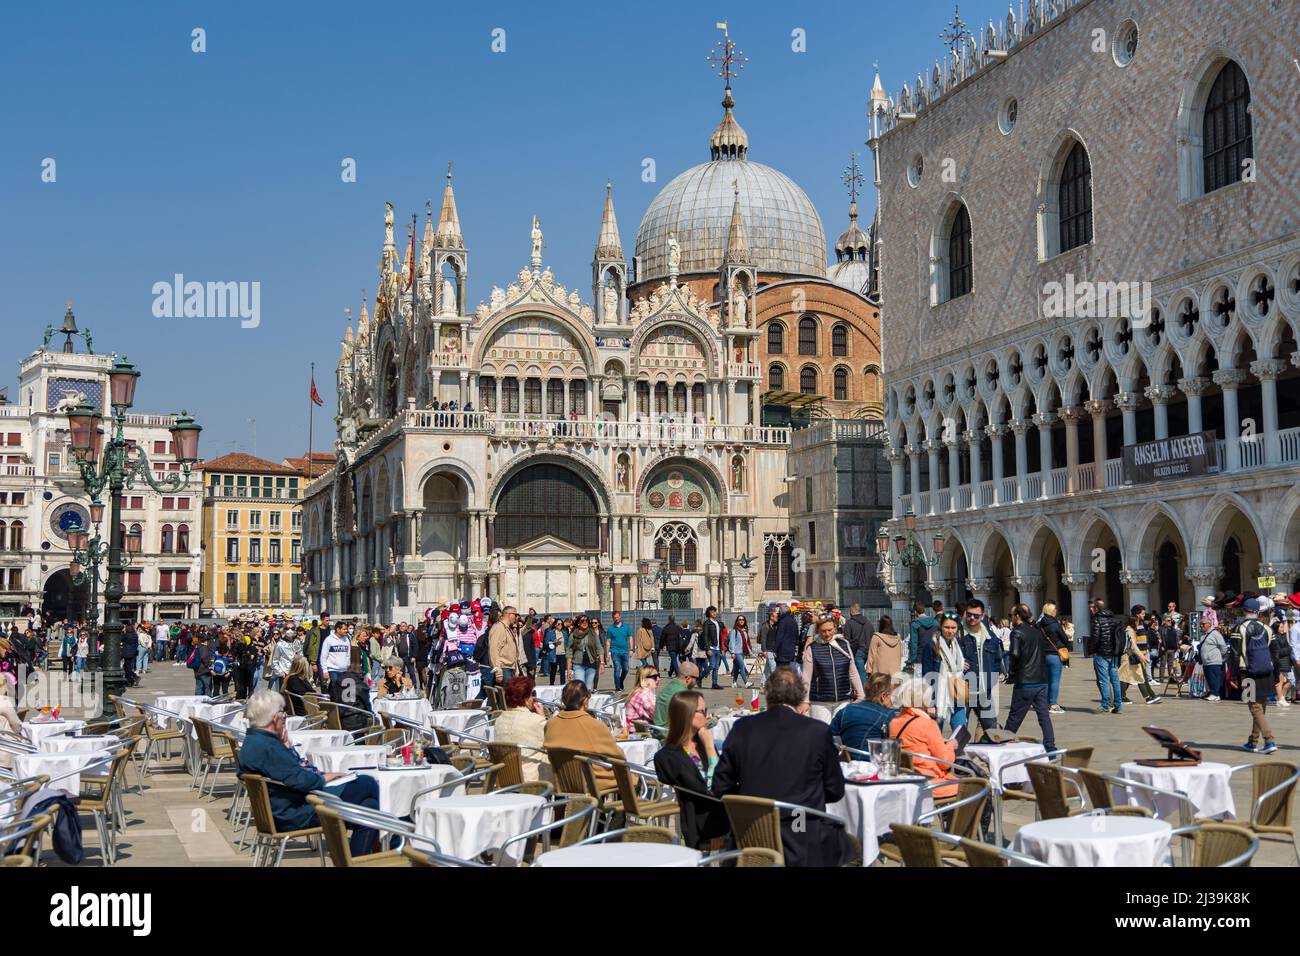 VENICE, ITALY - MARCH 27 2022: Crowds of tourists congregate around St Mark's Square and surrounding area in the famous Italian city of Venice Stock Photo